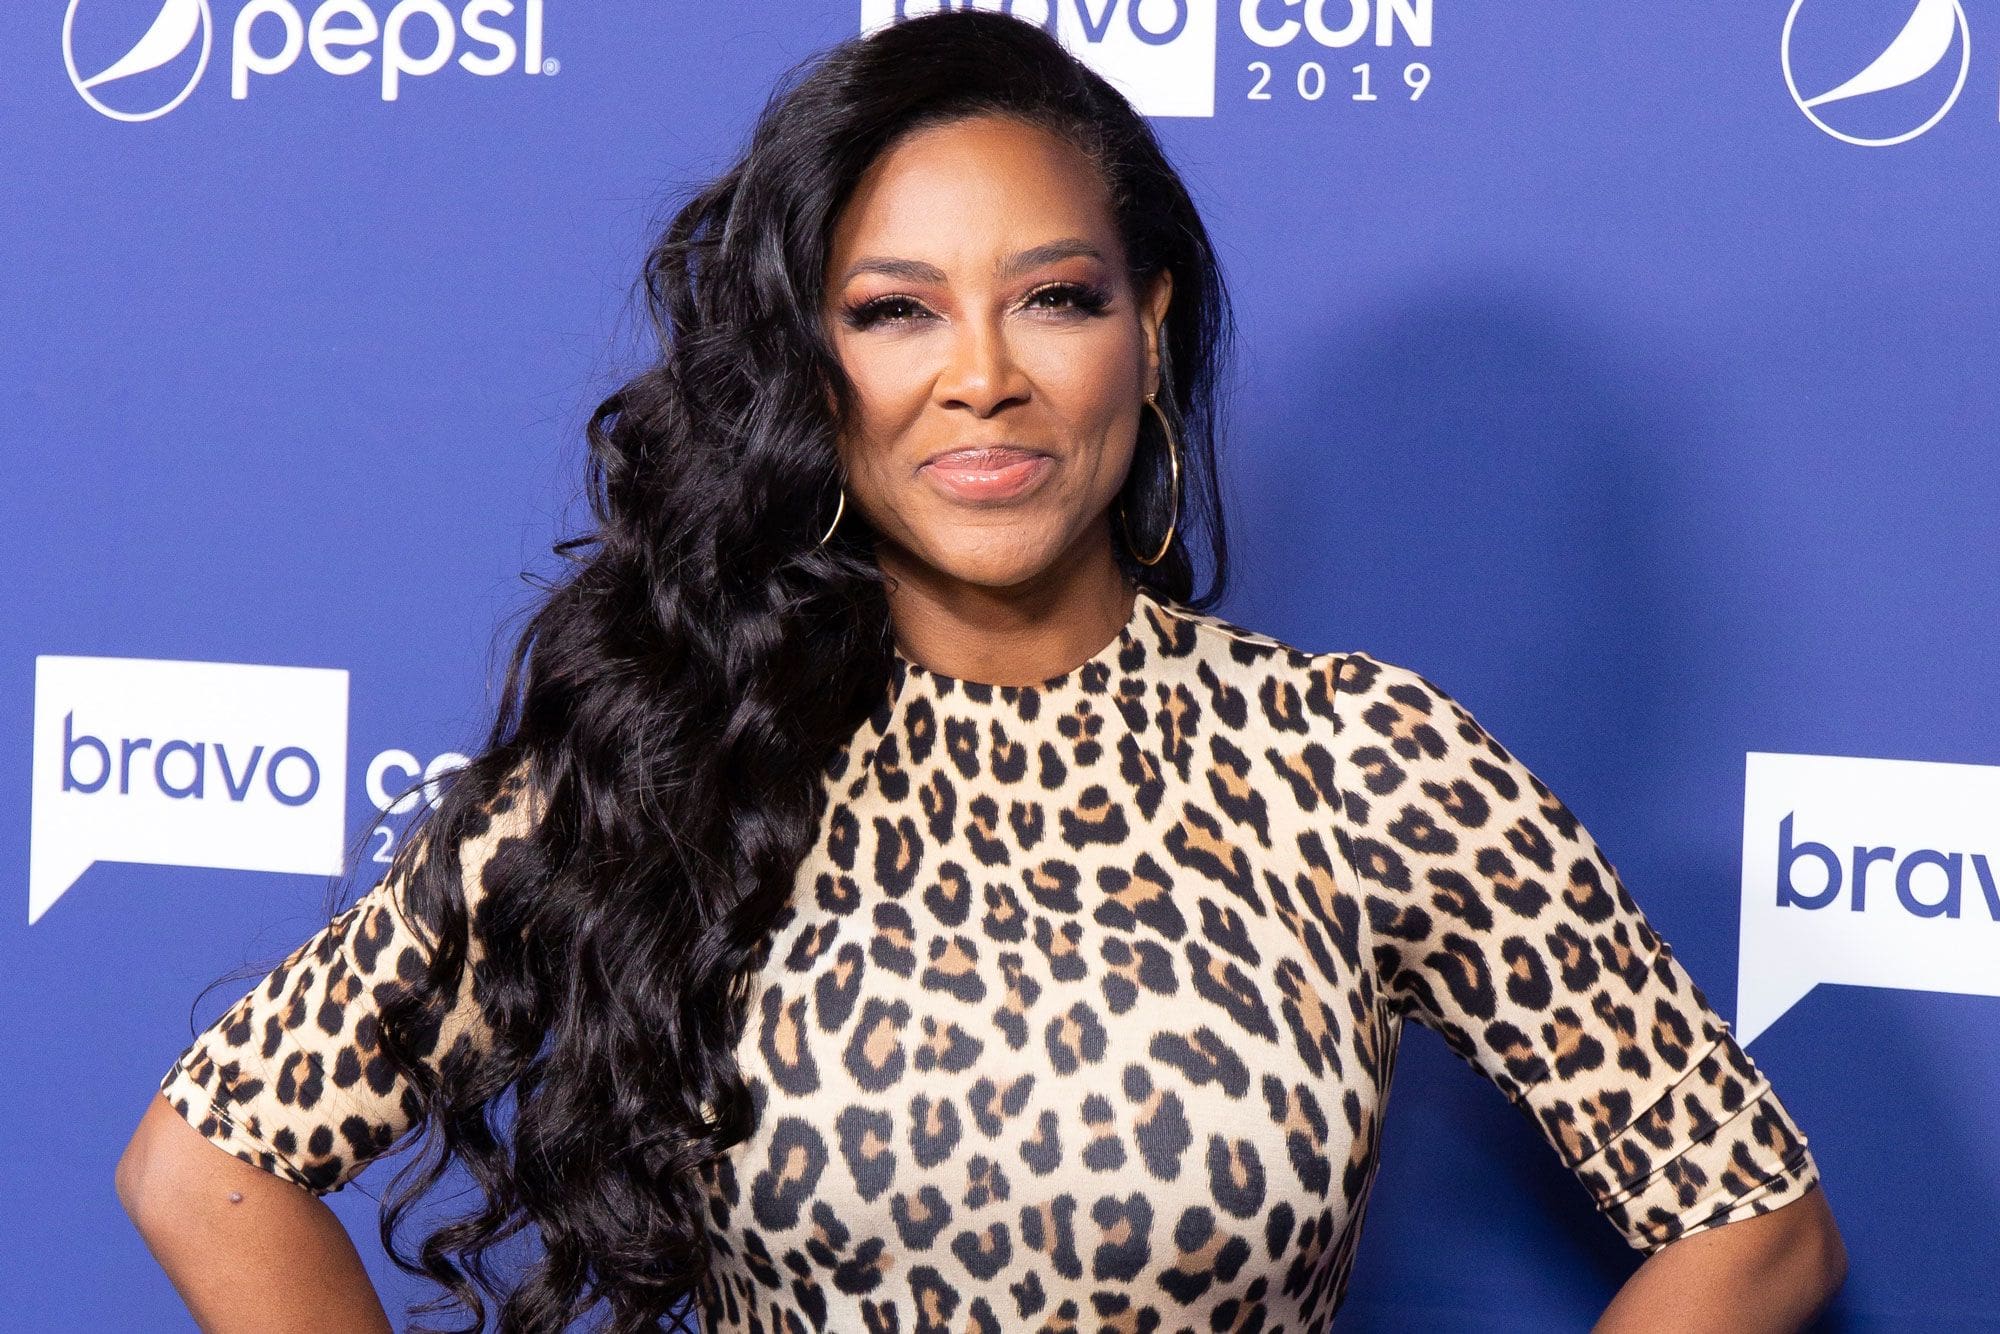 Kenya Moore Shares A Throwback Photo Featuring Eva Marcille, Taking Fans Down The Memory Lane